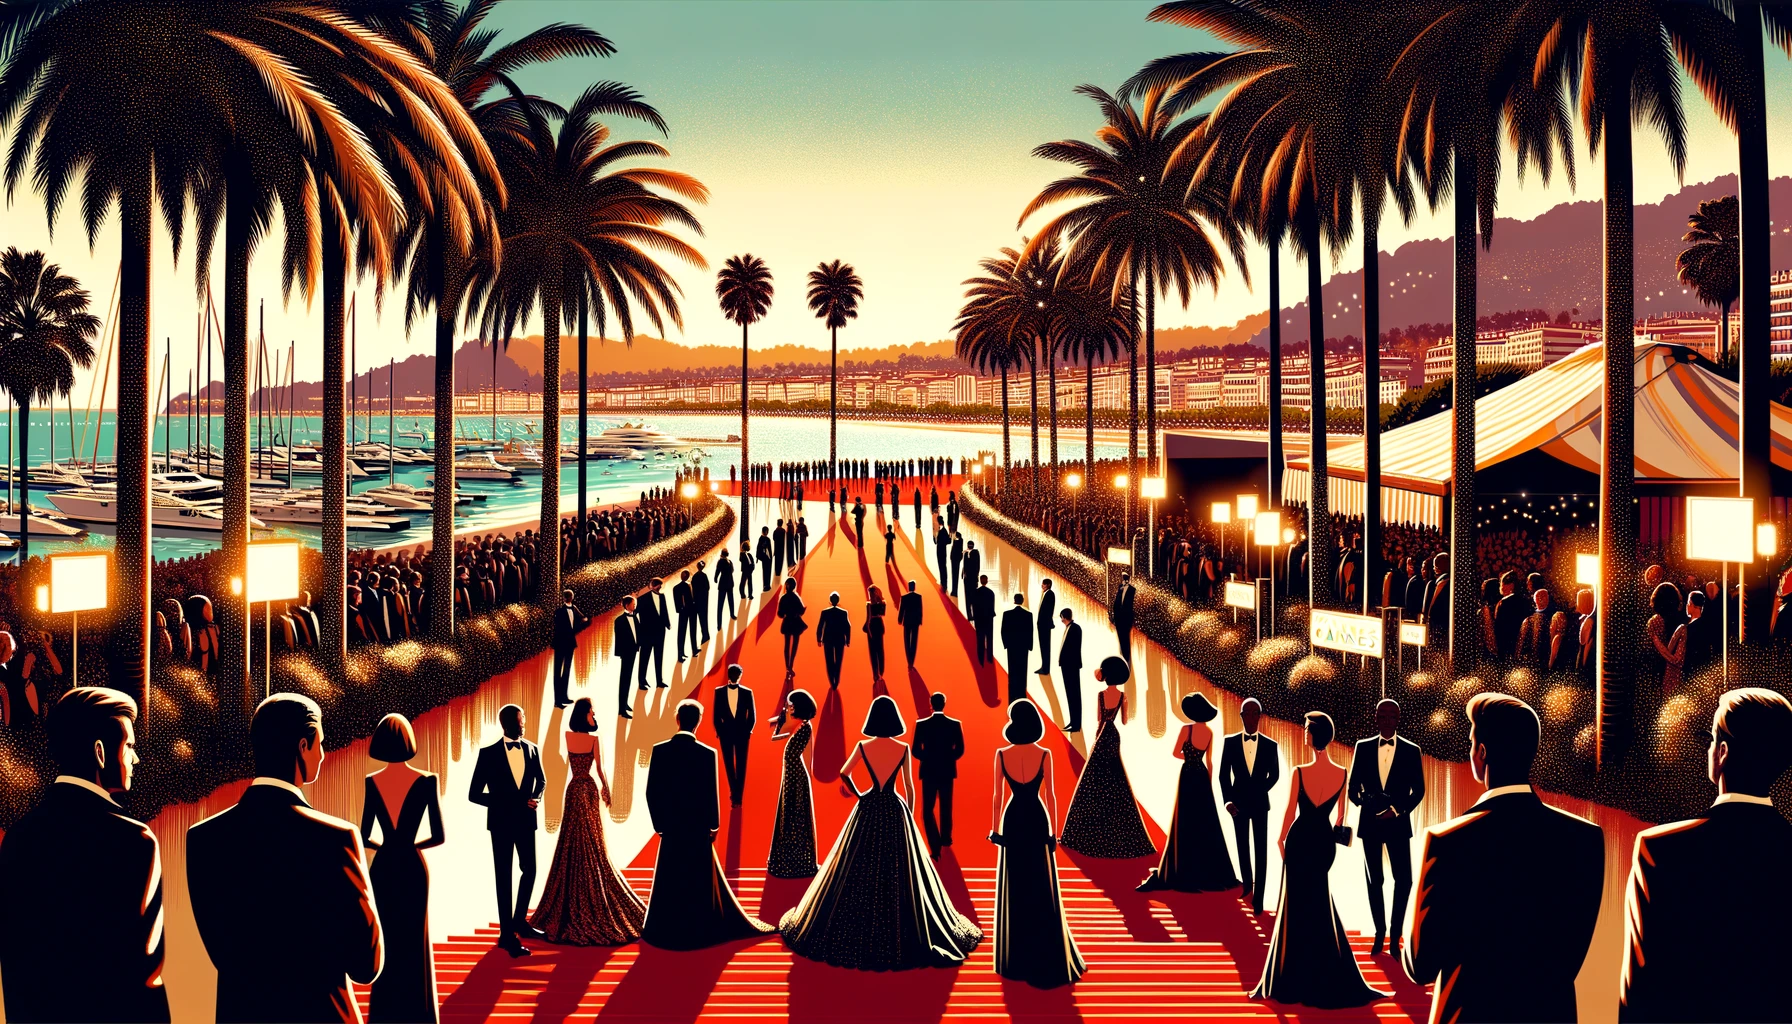 The Cannes Film Festival showing a red carpet amidst palm trees, with people in evening wear and the Mediterranean Sea in the background